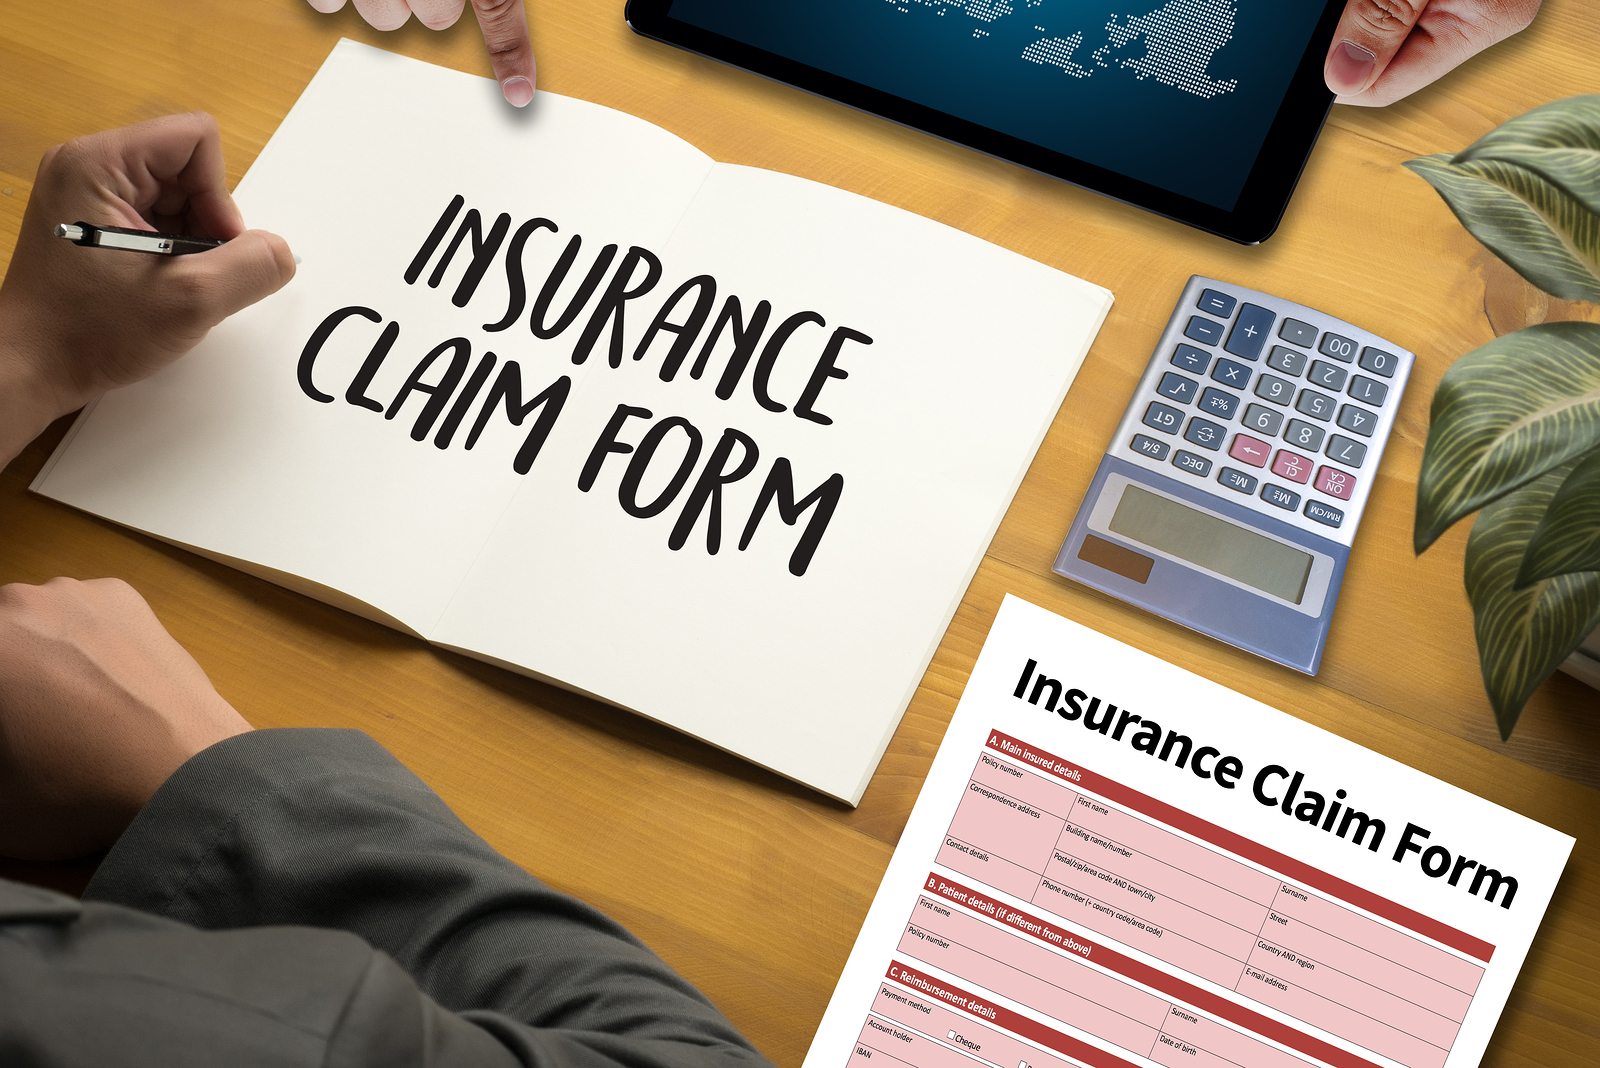 Claims Health Insurance Form , Business Concept , Insured Claims